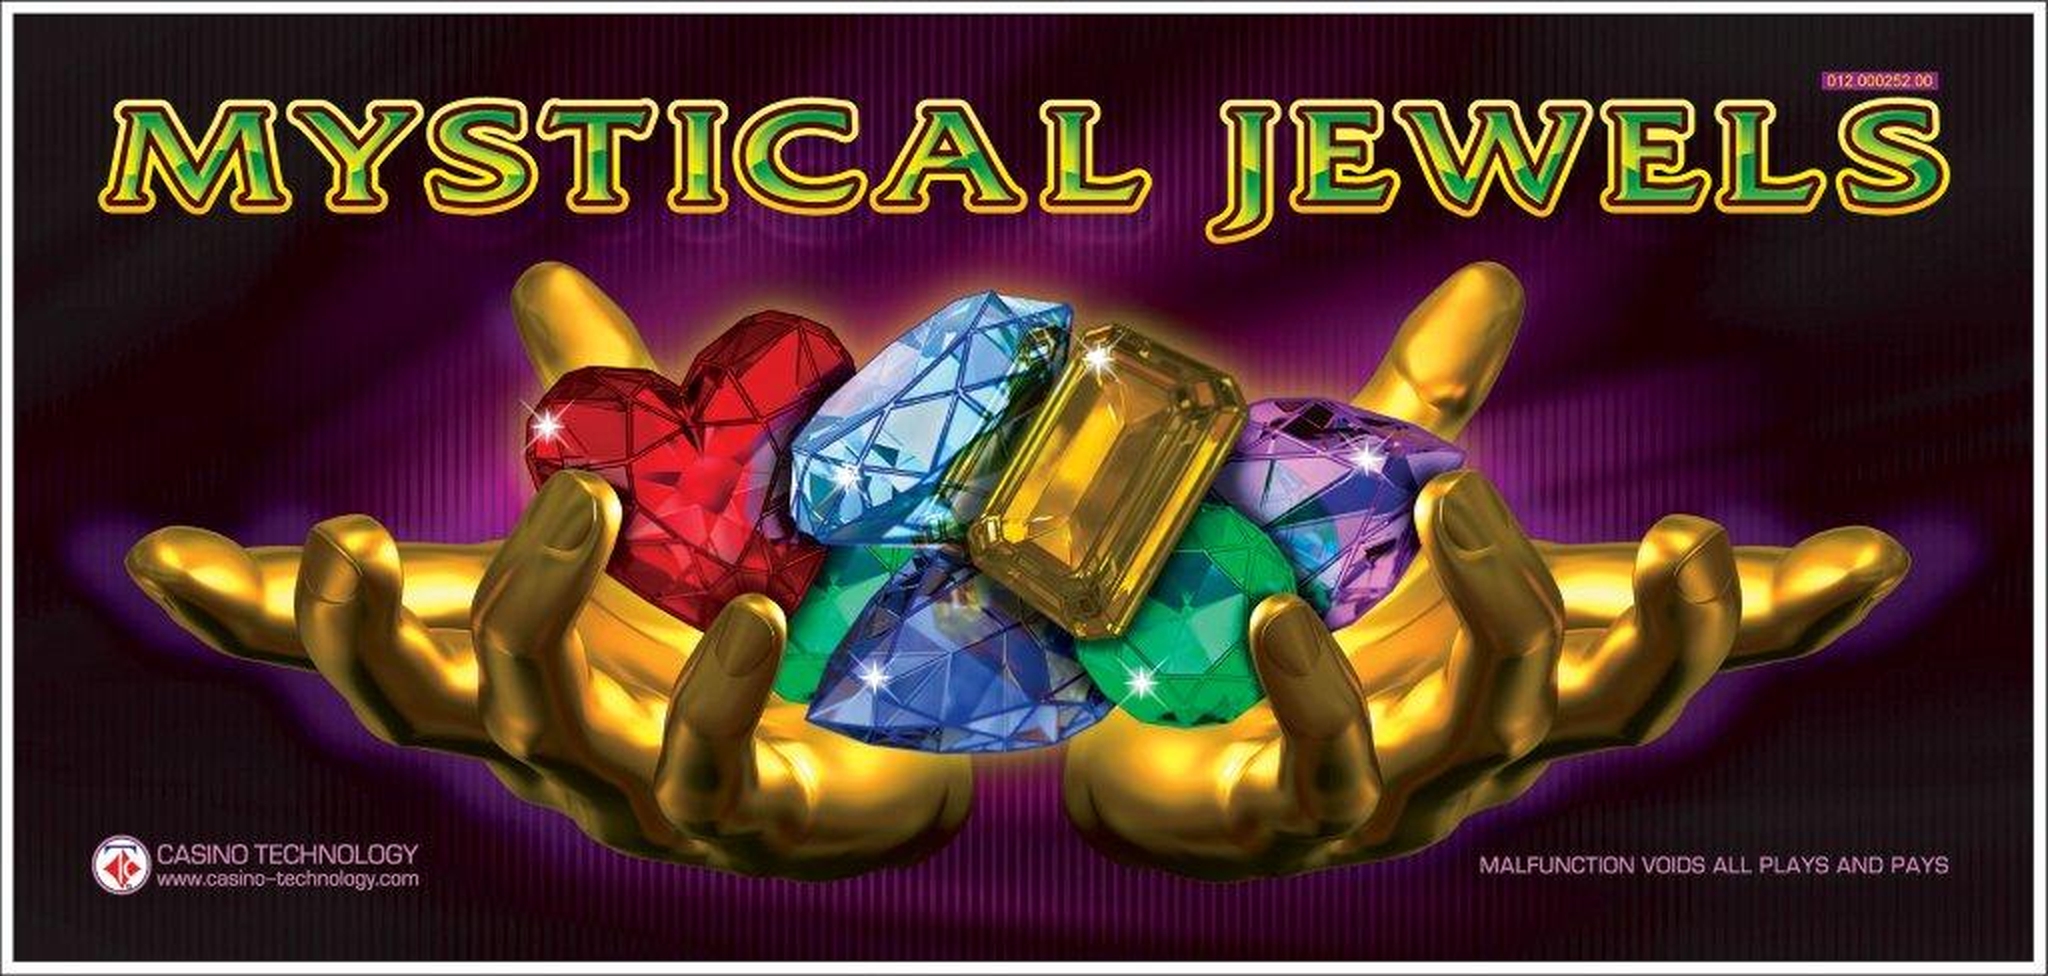 The Mystical Jewels Online Slot Demo Game by casino technology